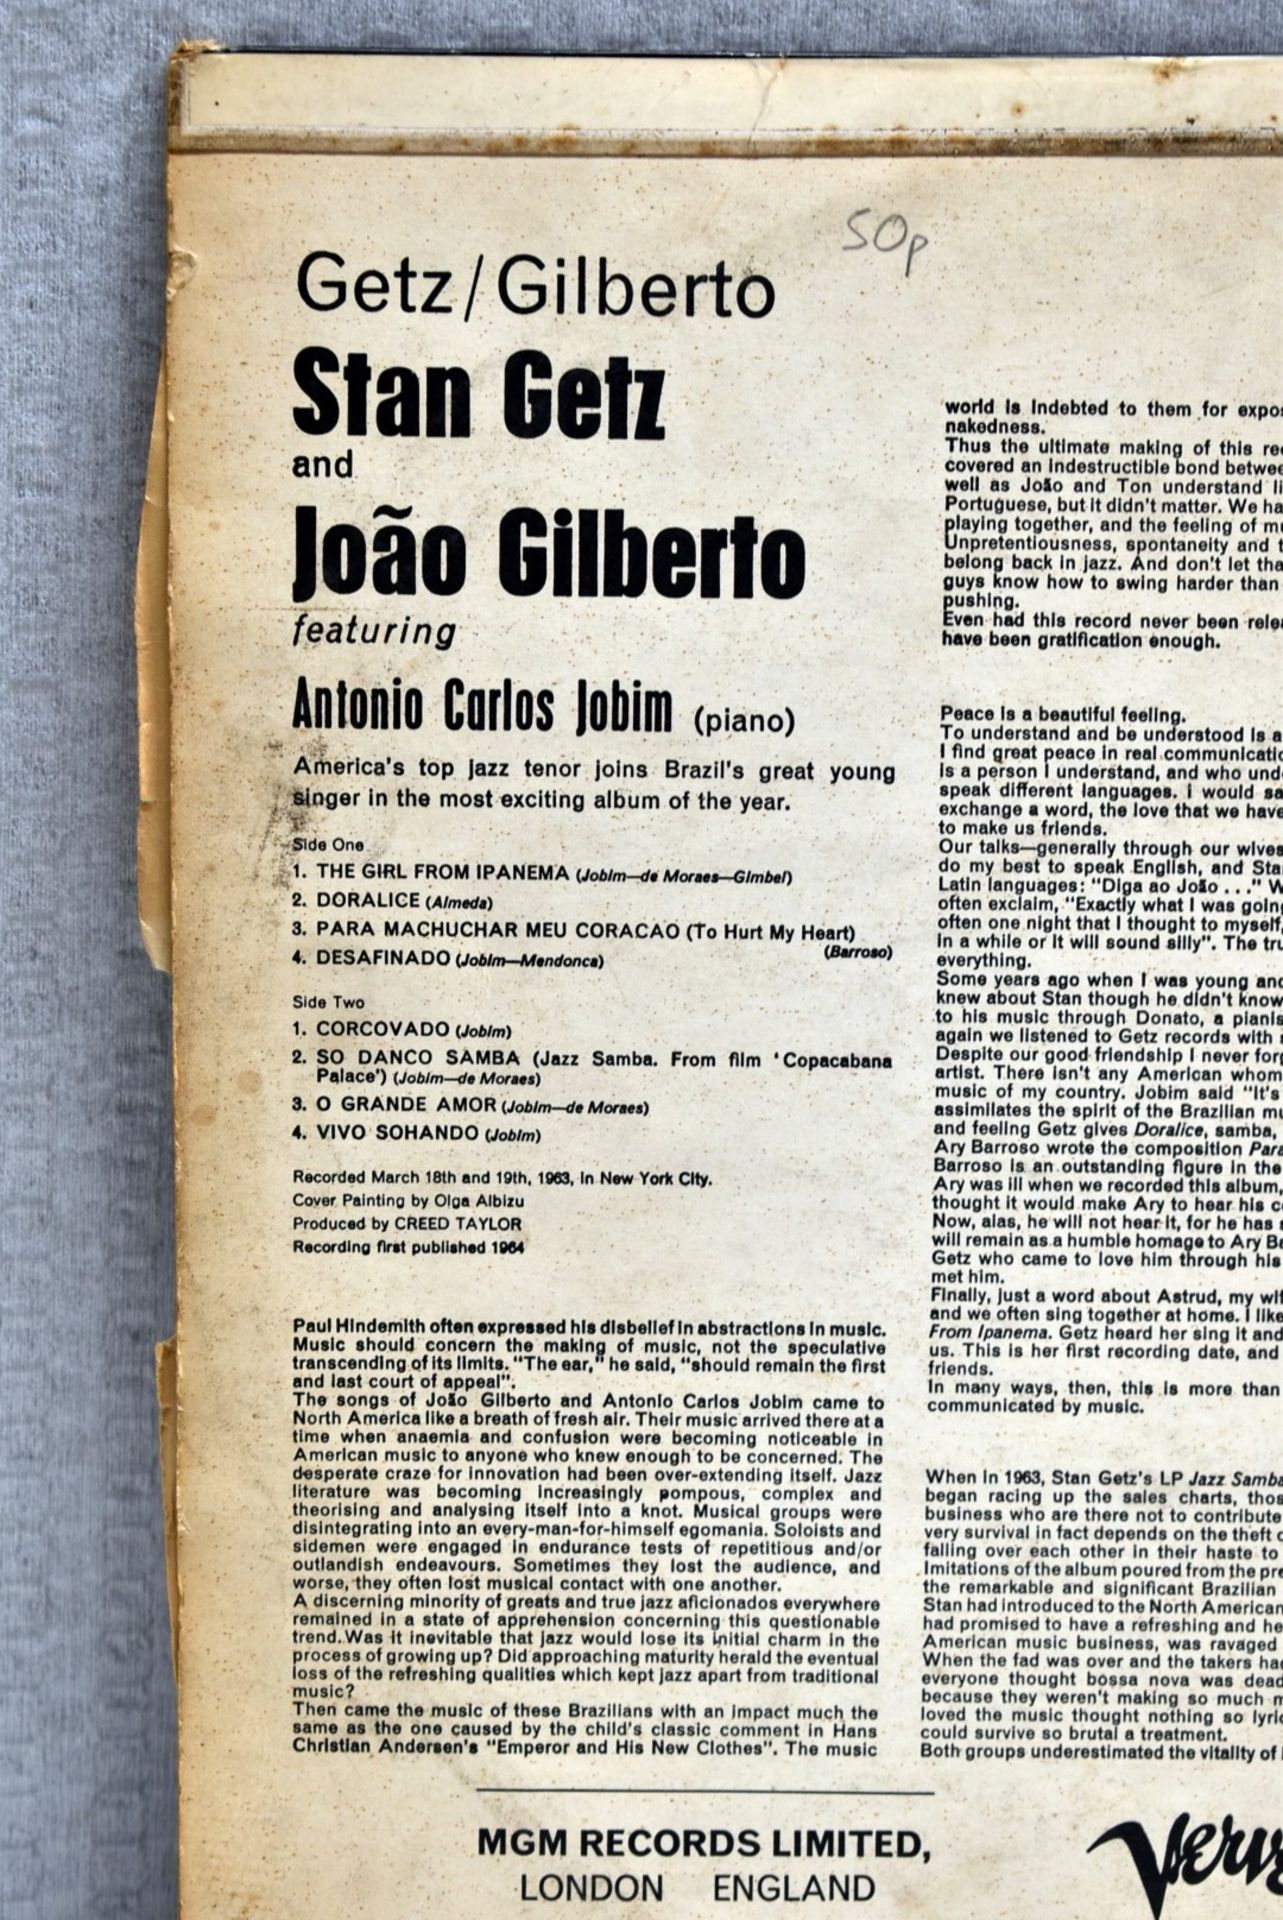 1 x GETZ / GILBERTO by Stan Getz and Joao Gilberto VERVE Records 1964 2 Sided 12 Inch Vynil - Ref: - Image 9 of 15